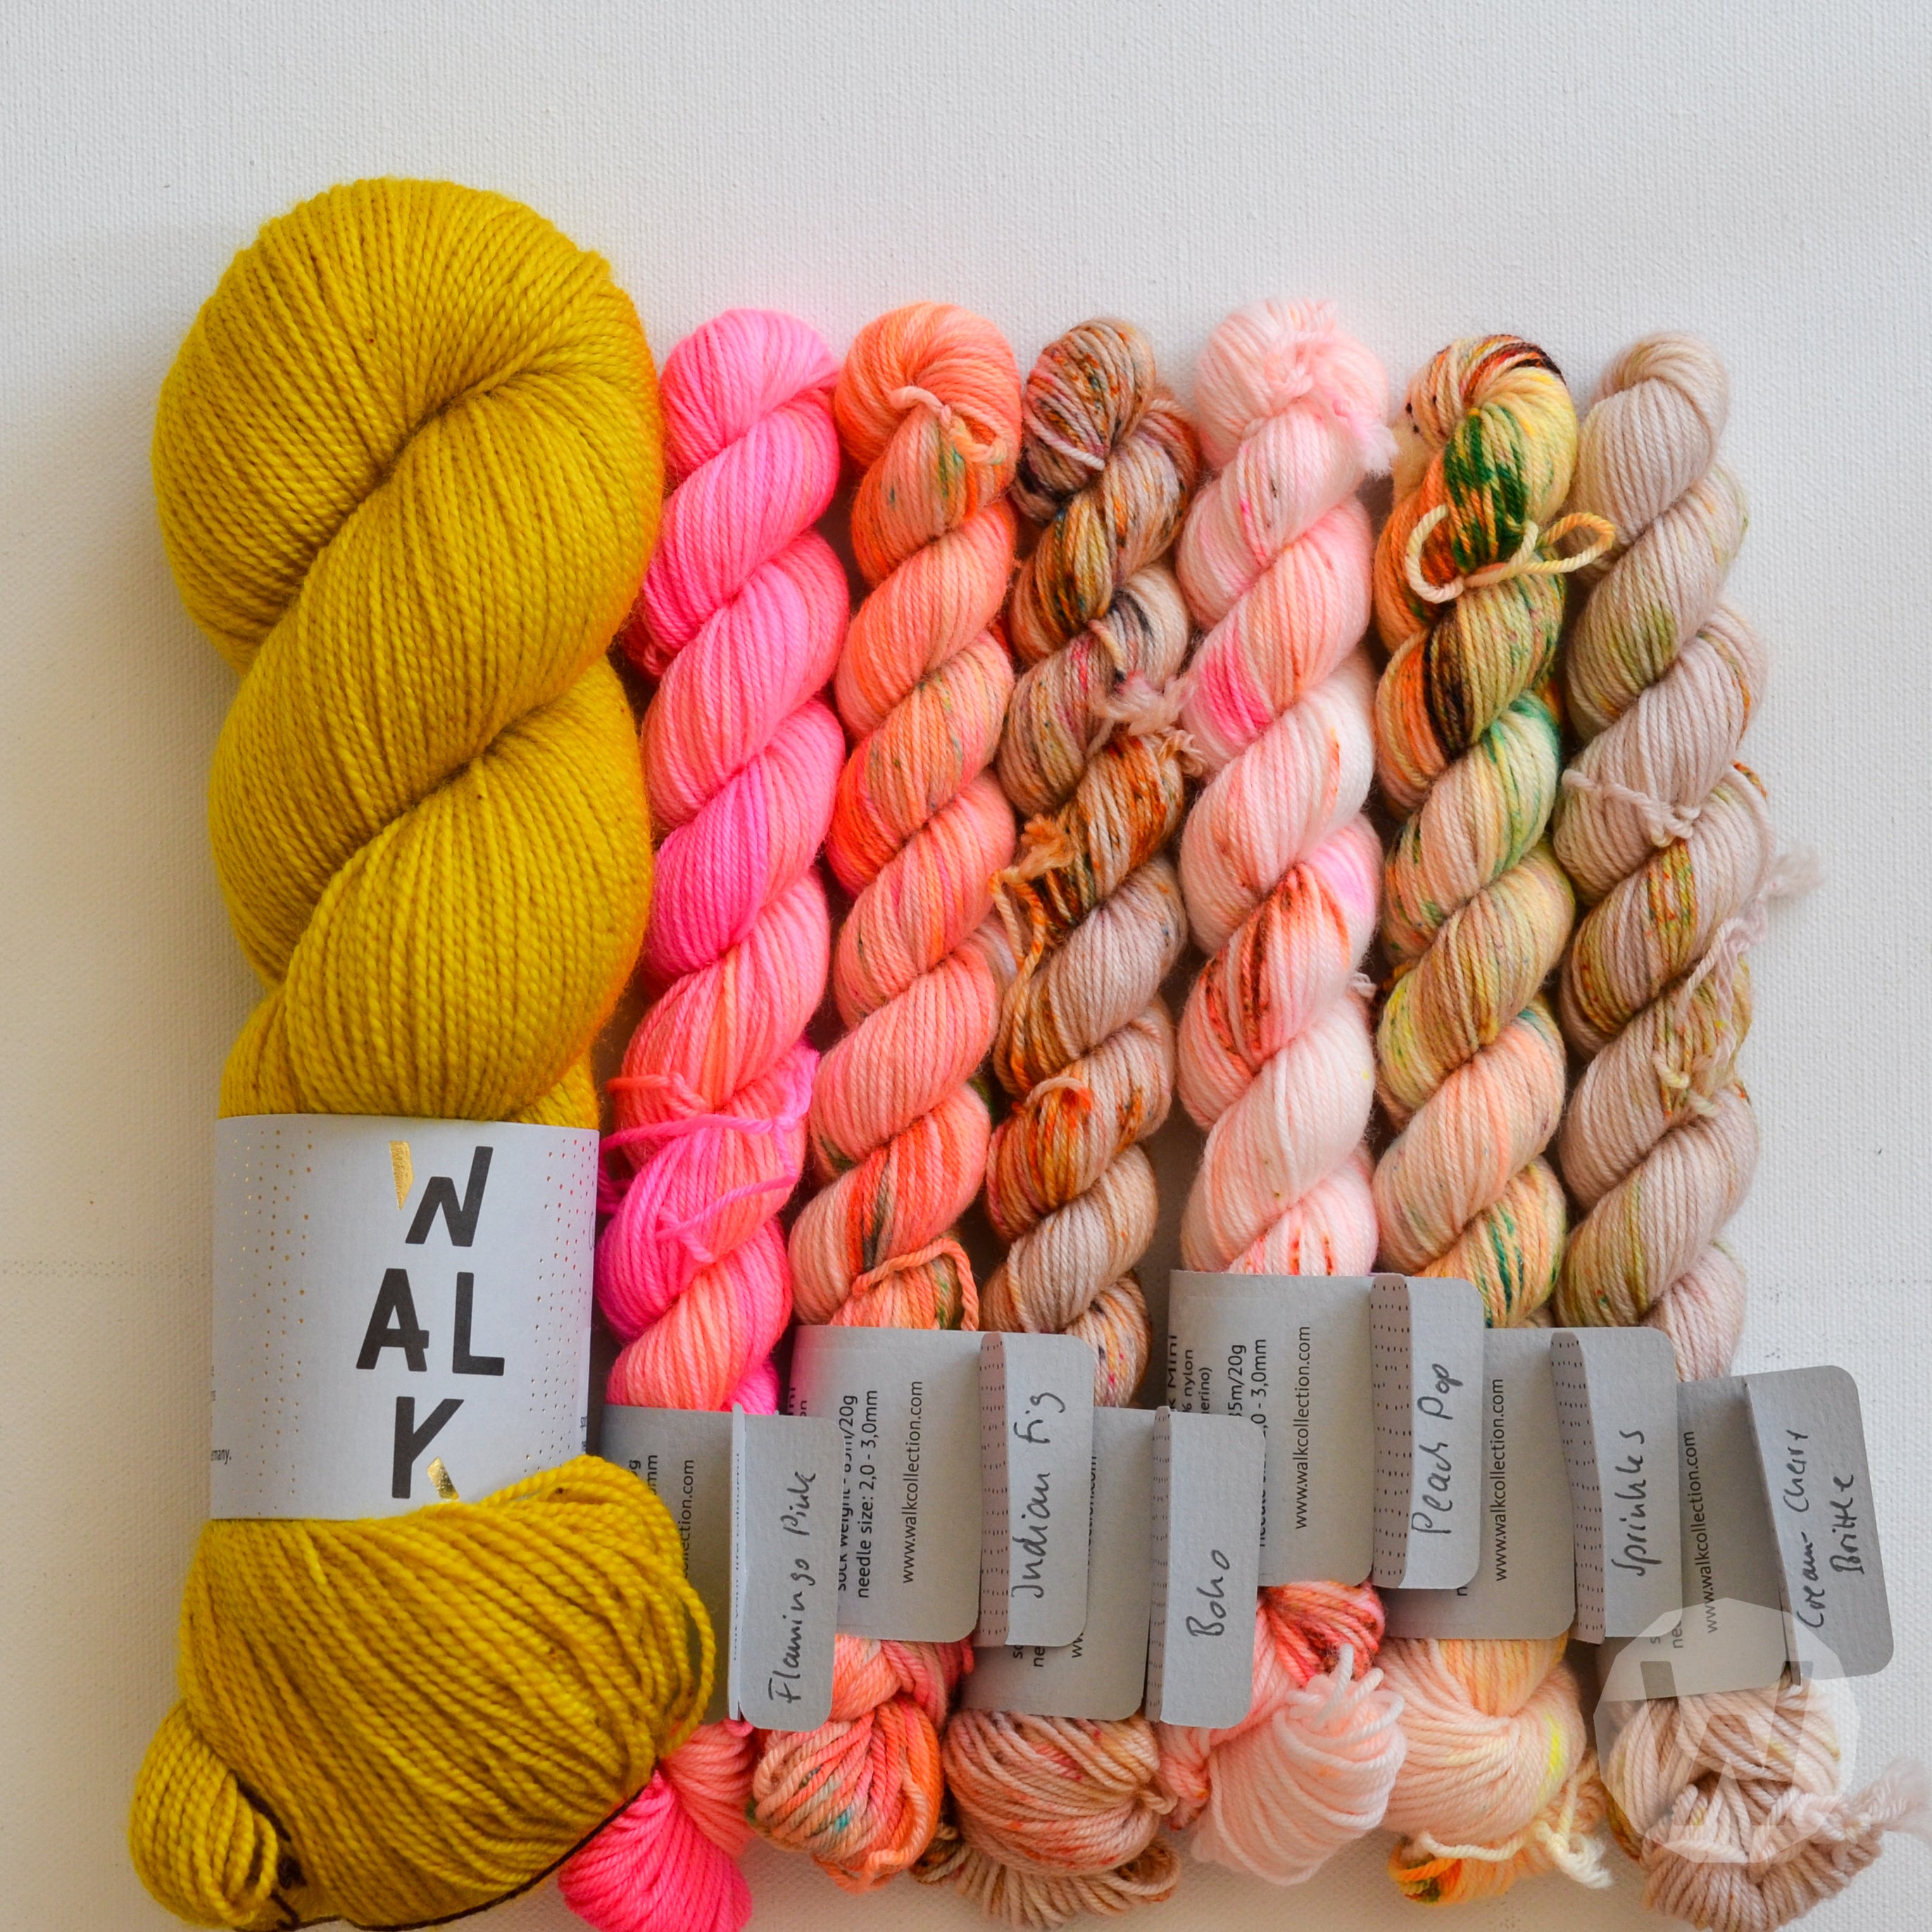 YARN SET &quot;One More Stripe&quot;